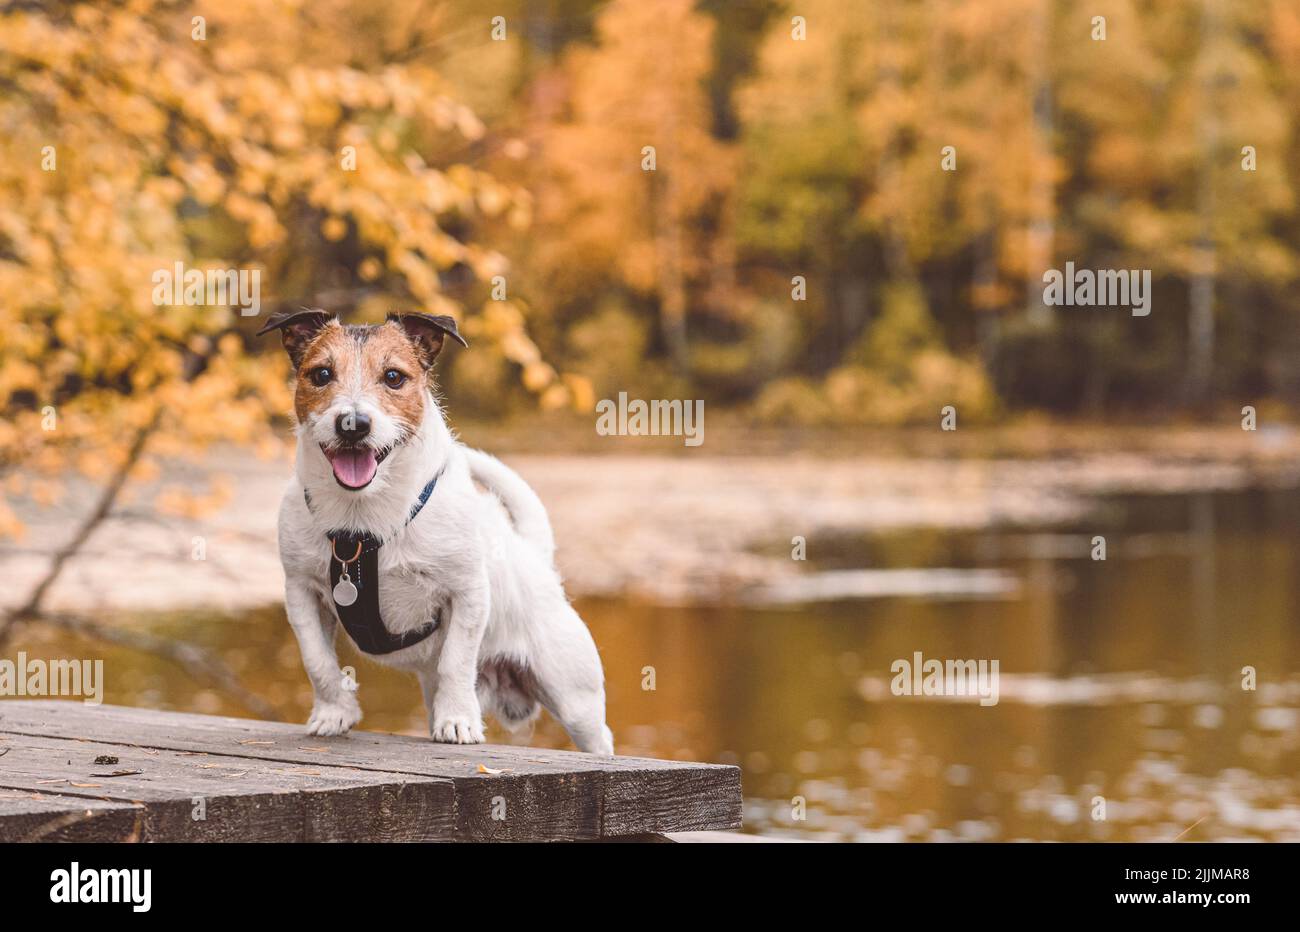 Friendly smiling dog at lake shore with orange autumn trees in background Stock Photo